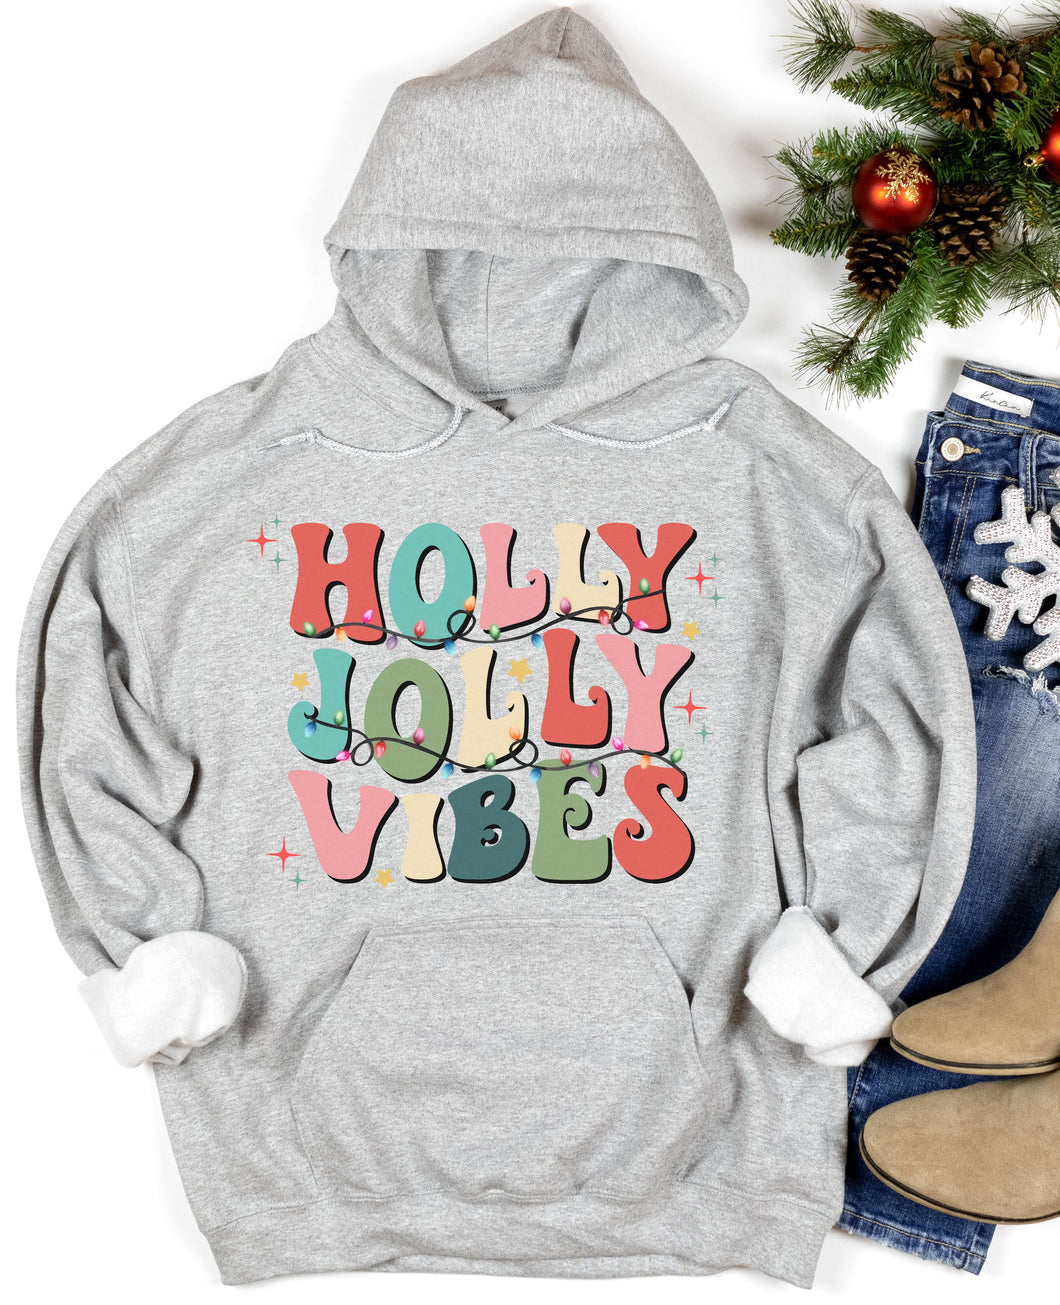 Holly Jolly Vibes Graphic Tee